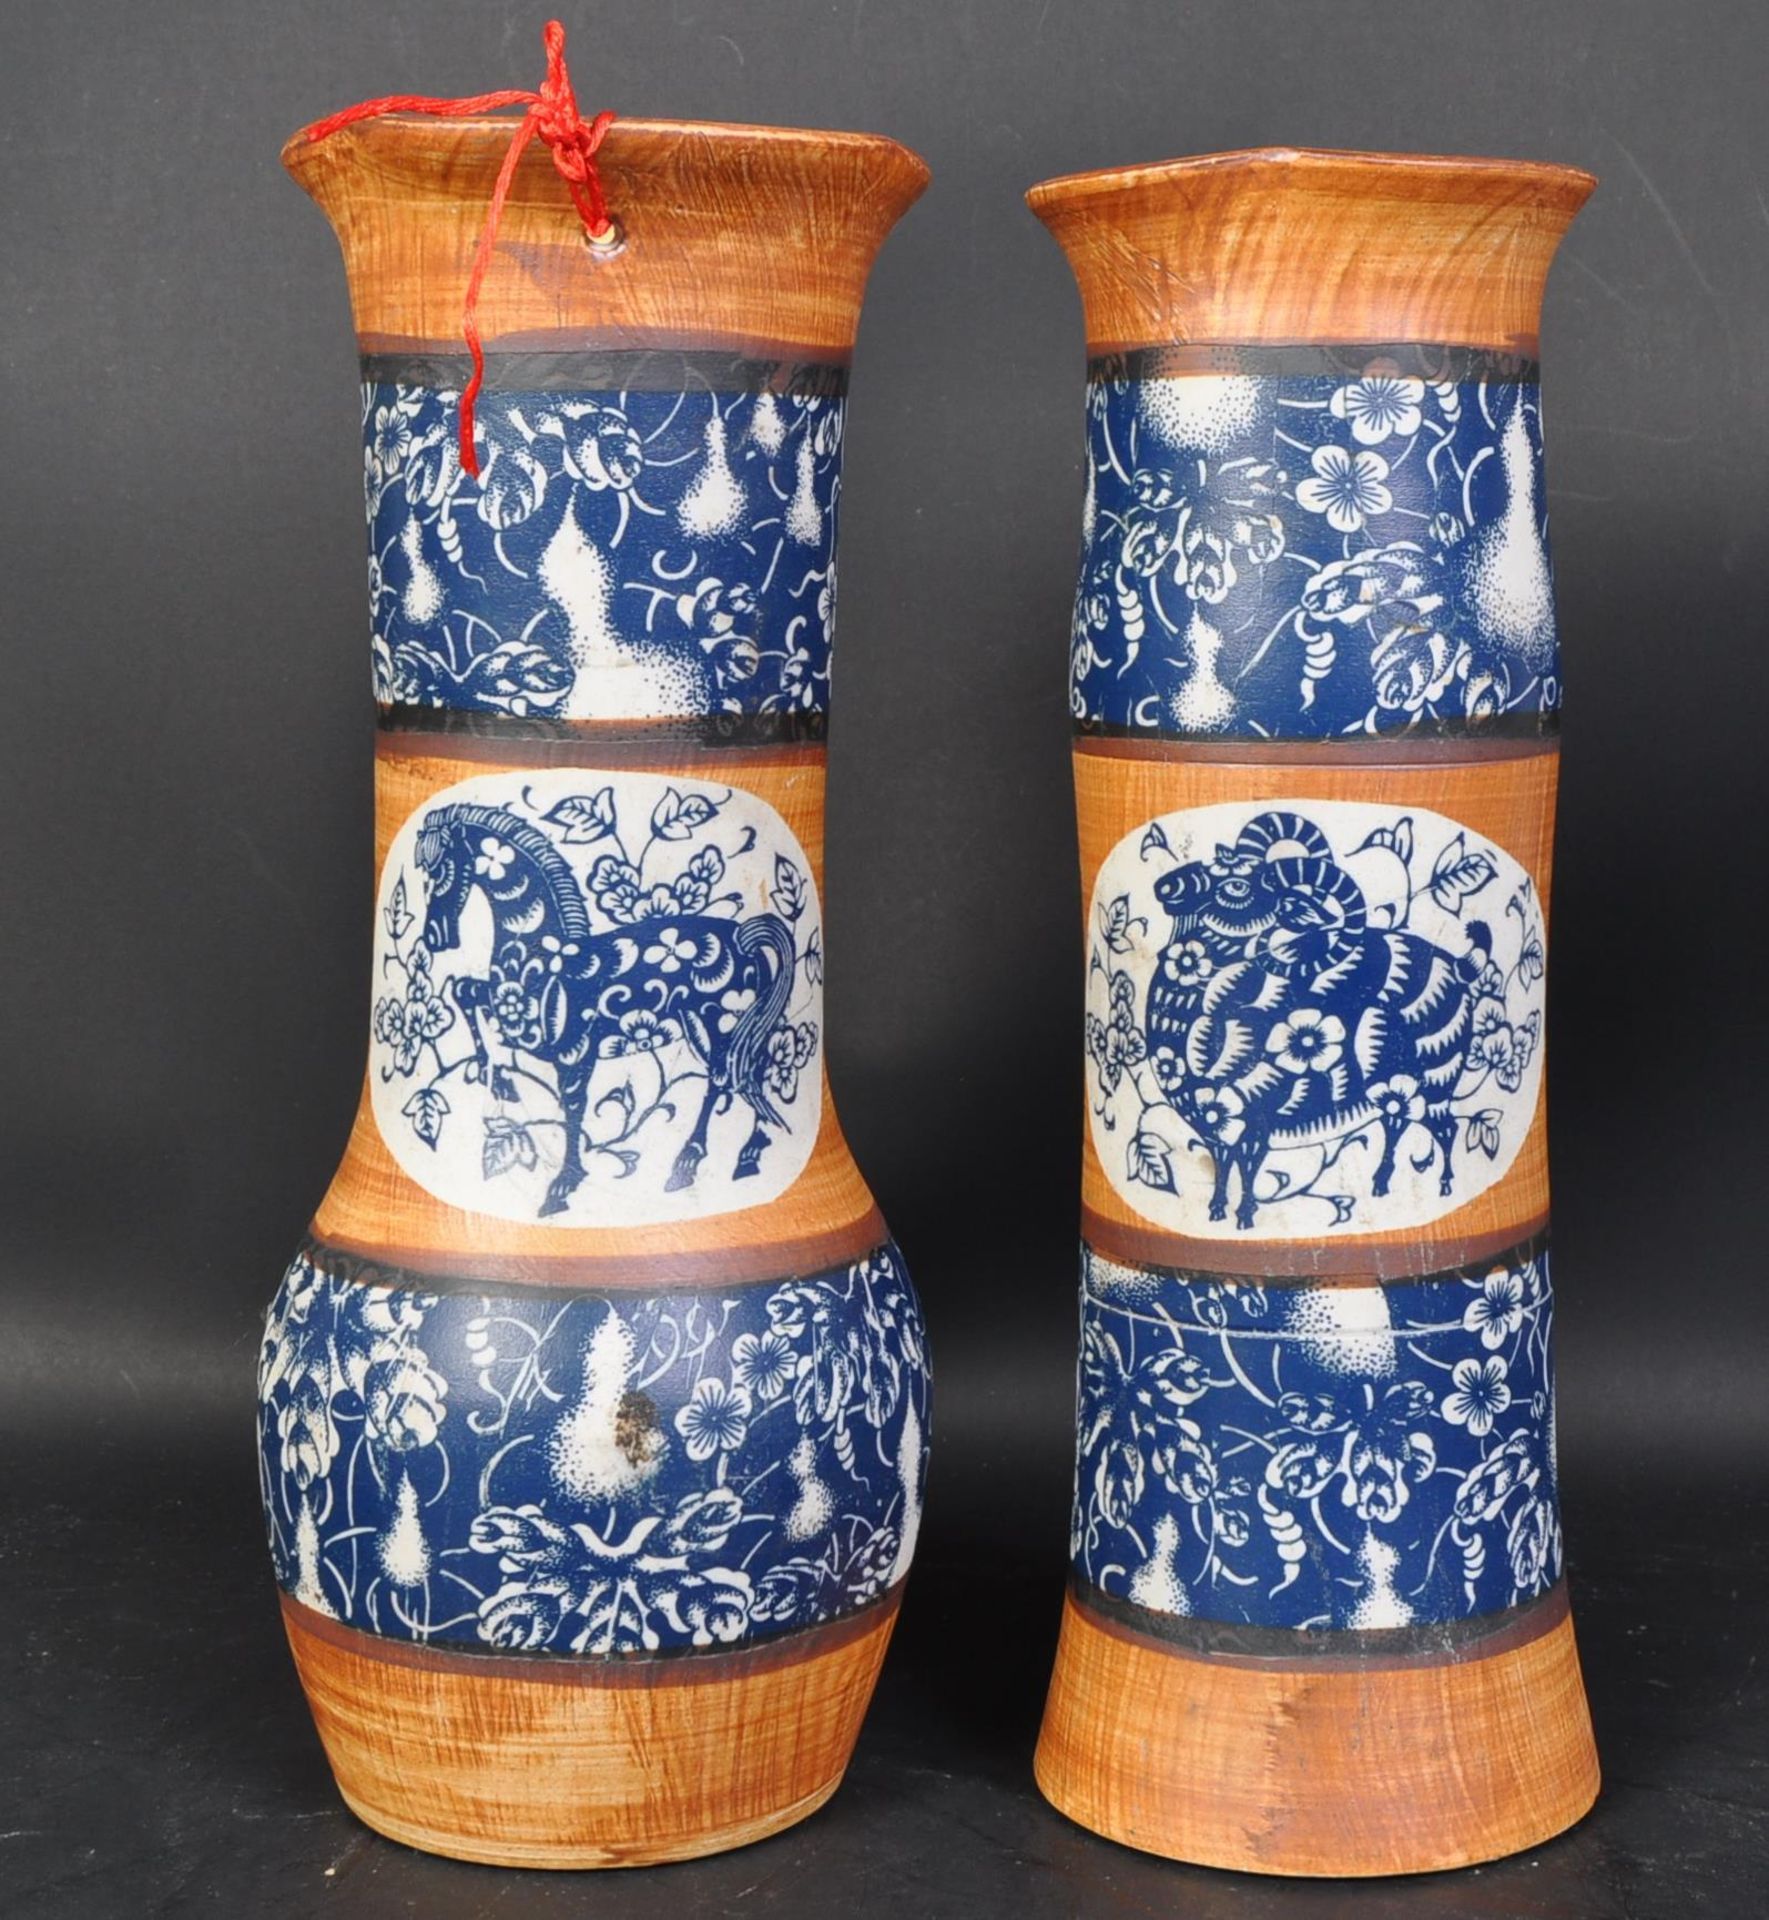 PAIR OF CHINESE POTTERY GU VASES - RAM & HORSE